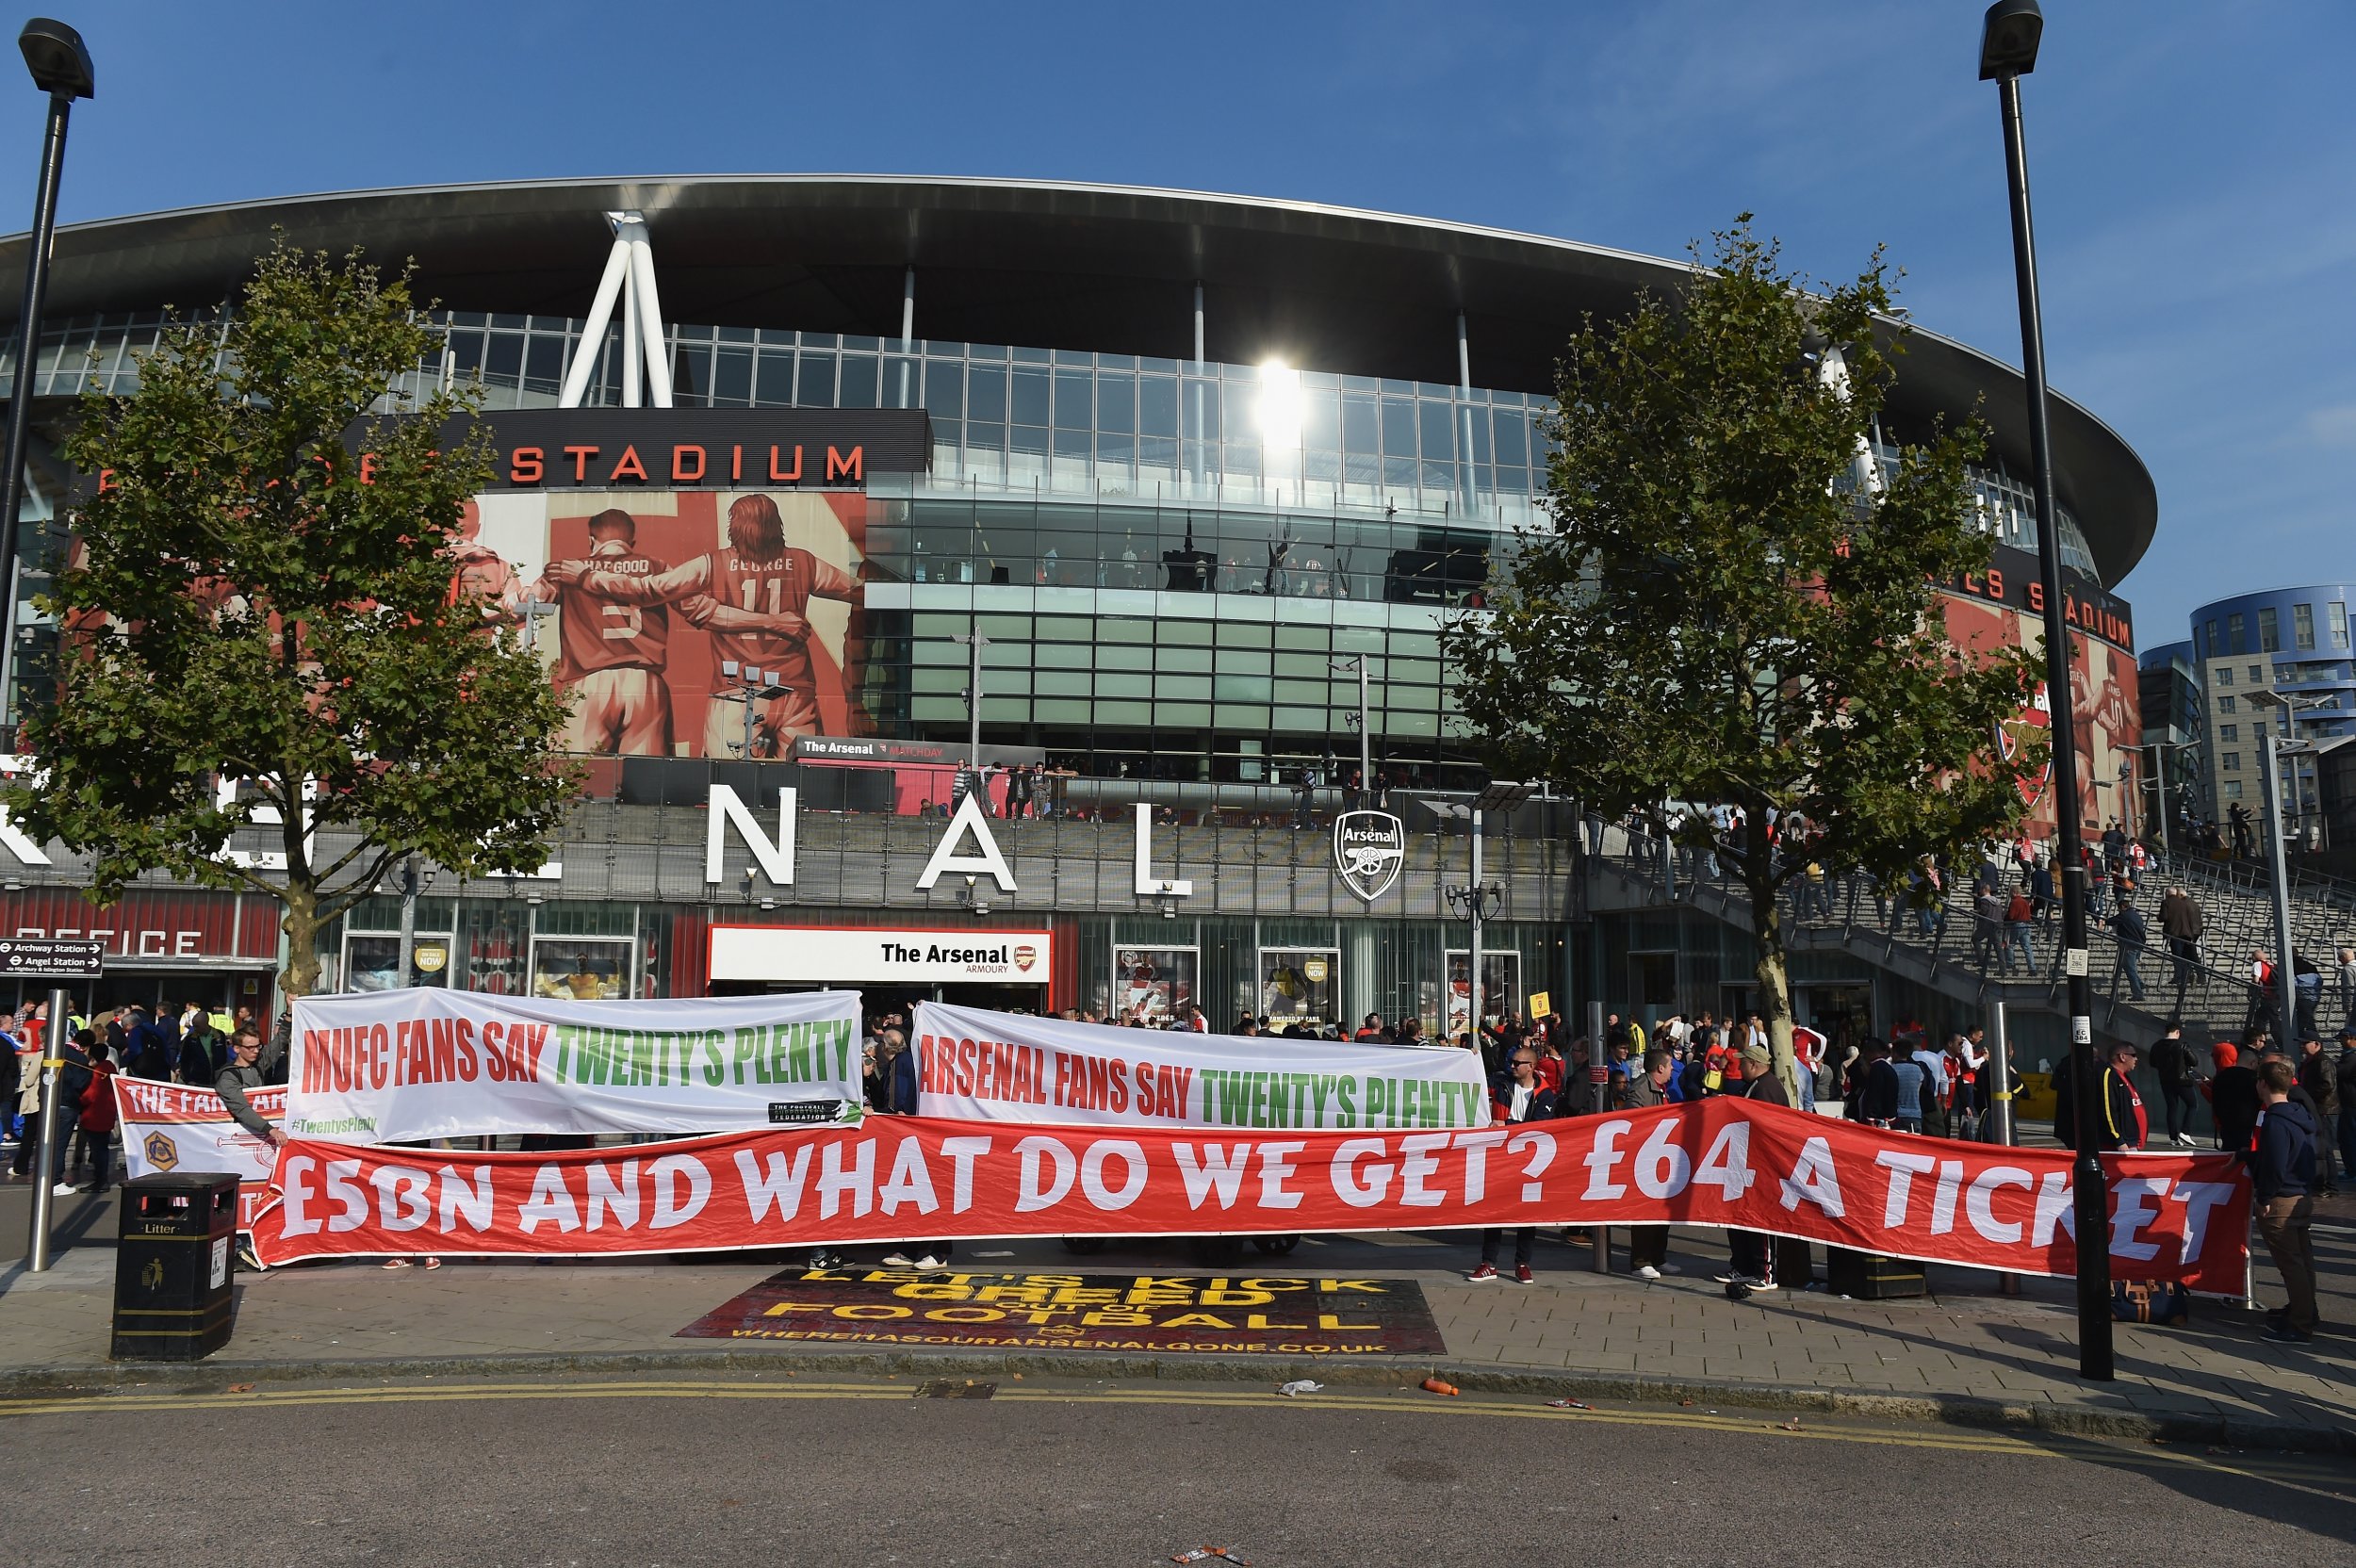 Ticket price protests outside Emirates Stadium, Arsenal's home ground.